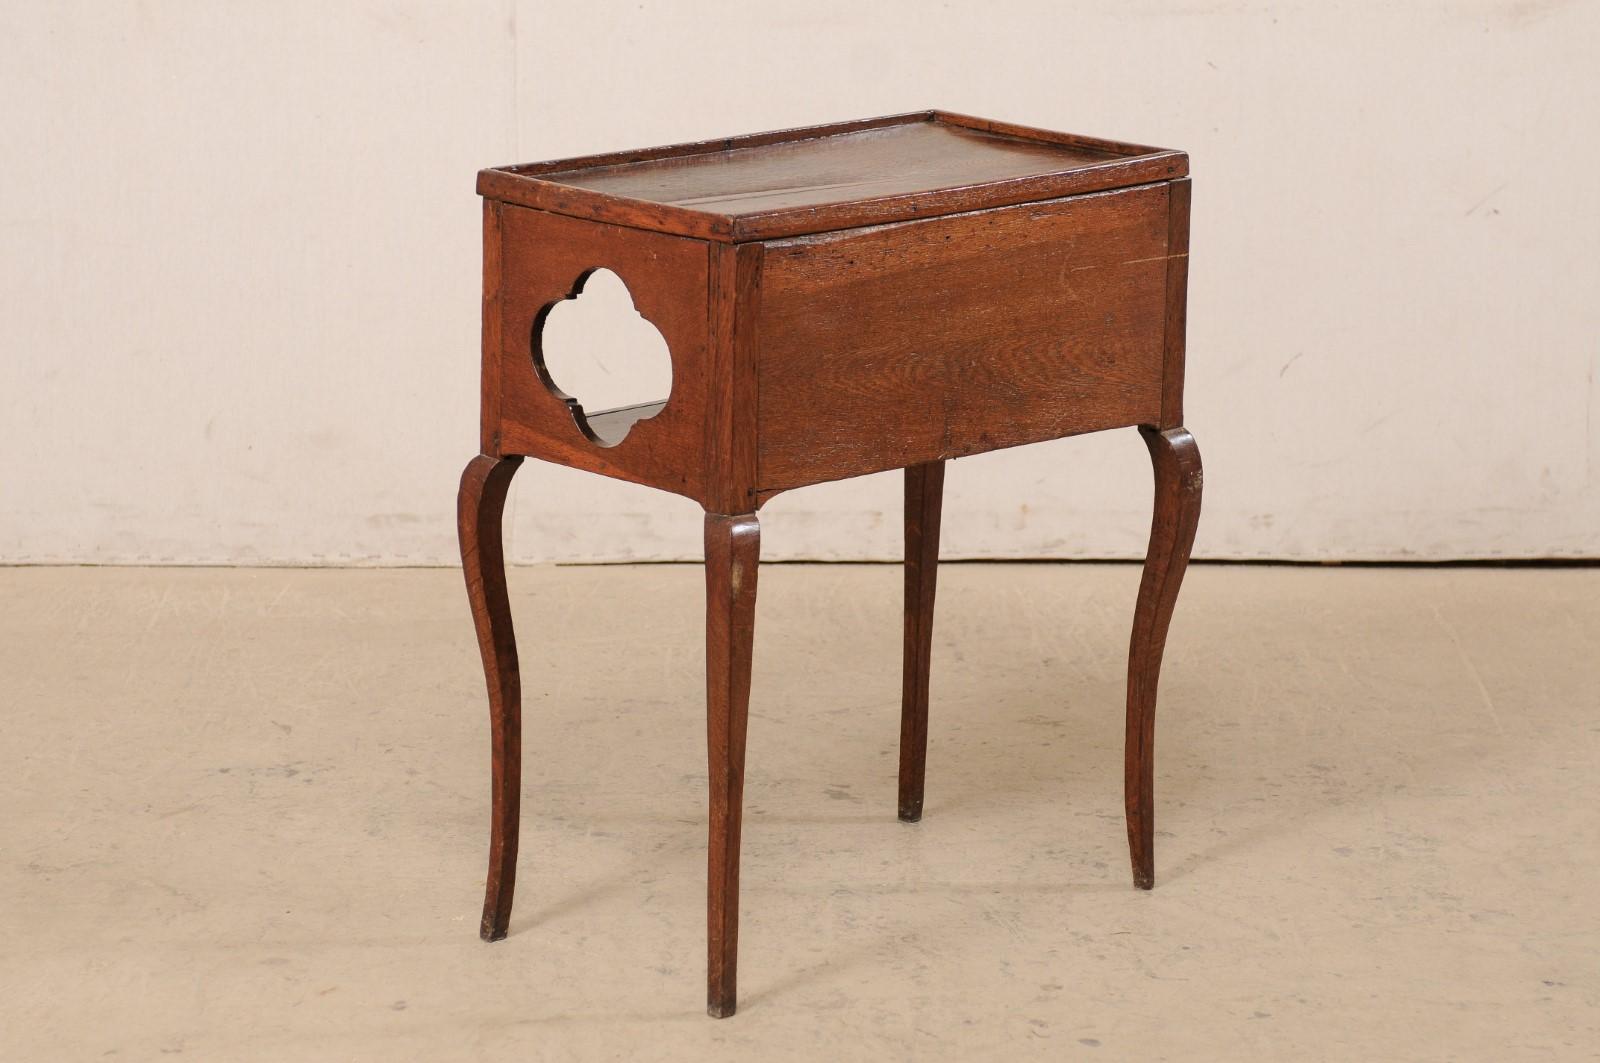 19th C. French Side Table with Quatrefoil Cut-Outs at Sides, Lower Shelf/Cubie 2